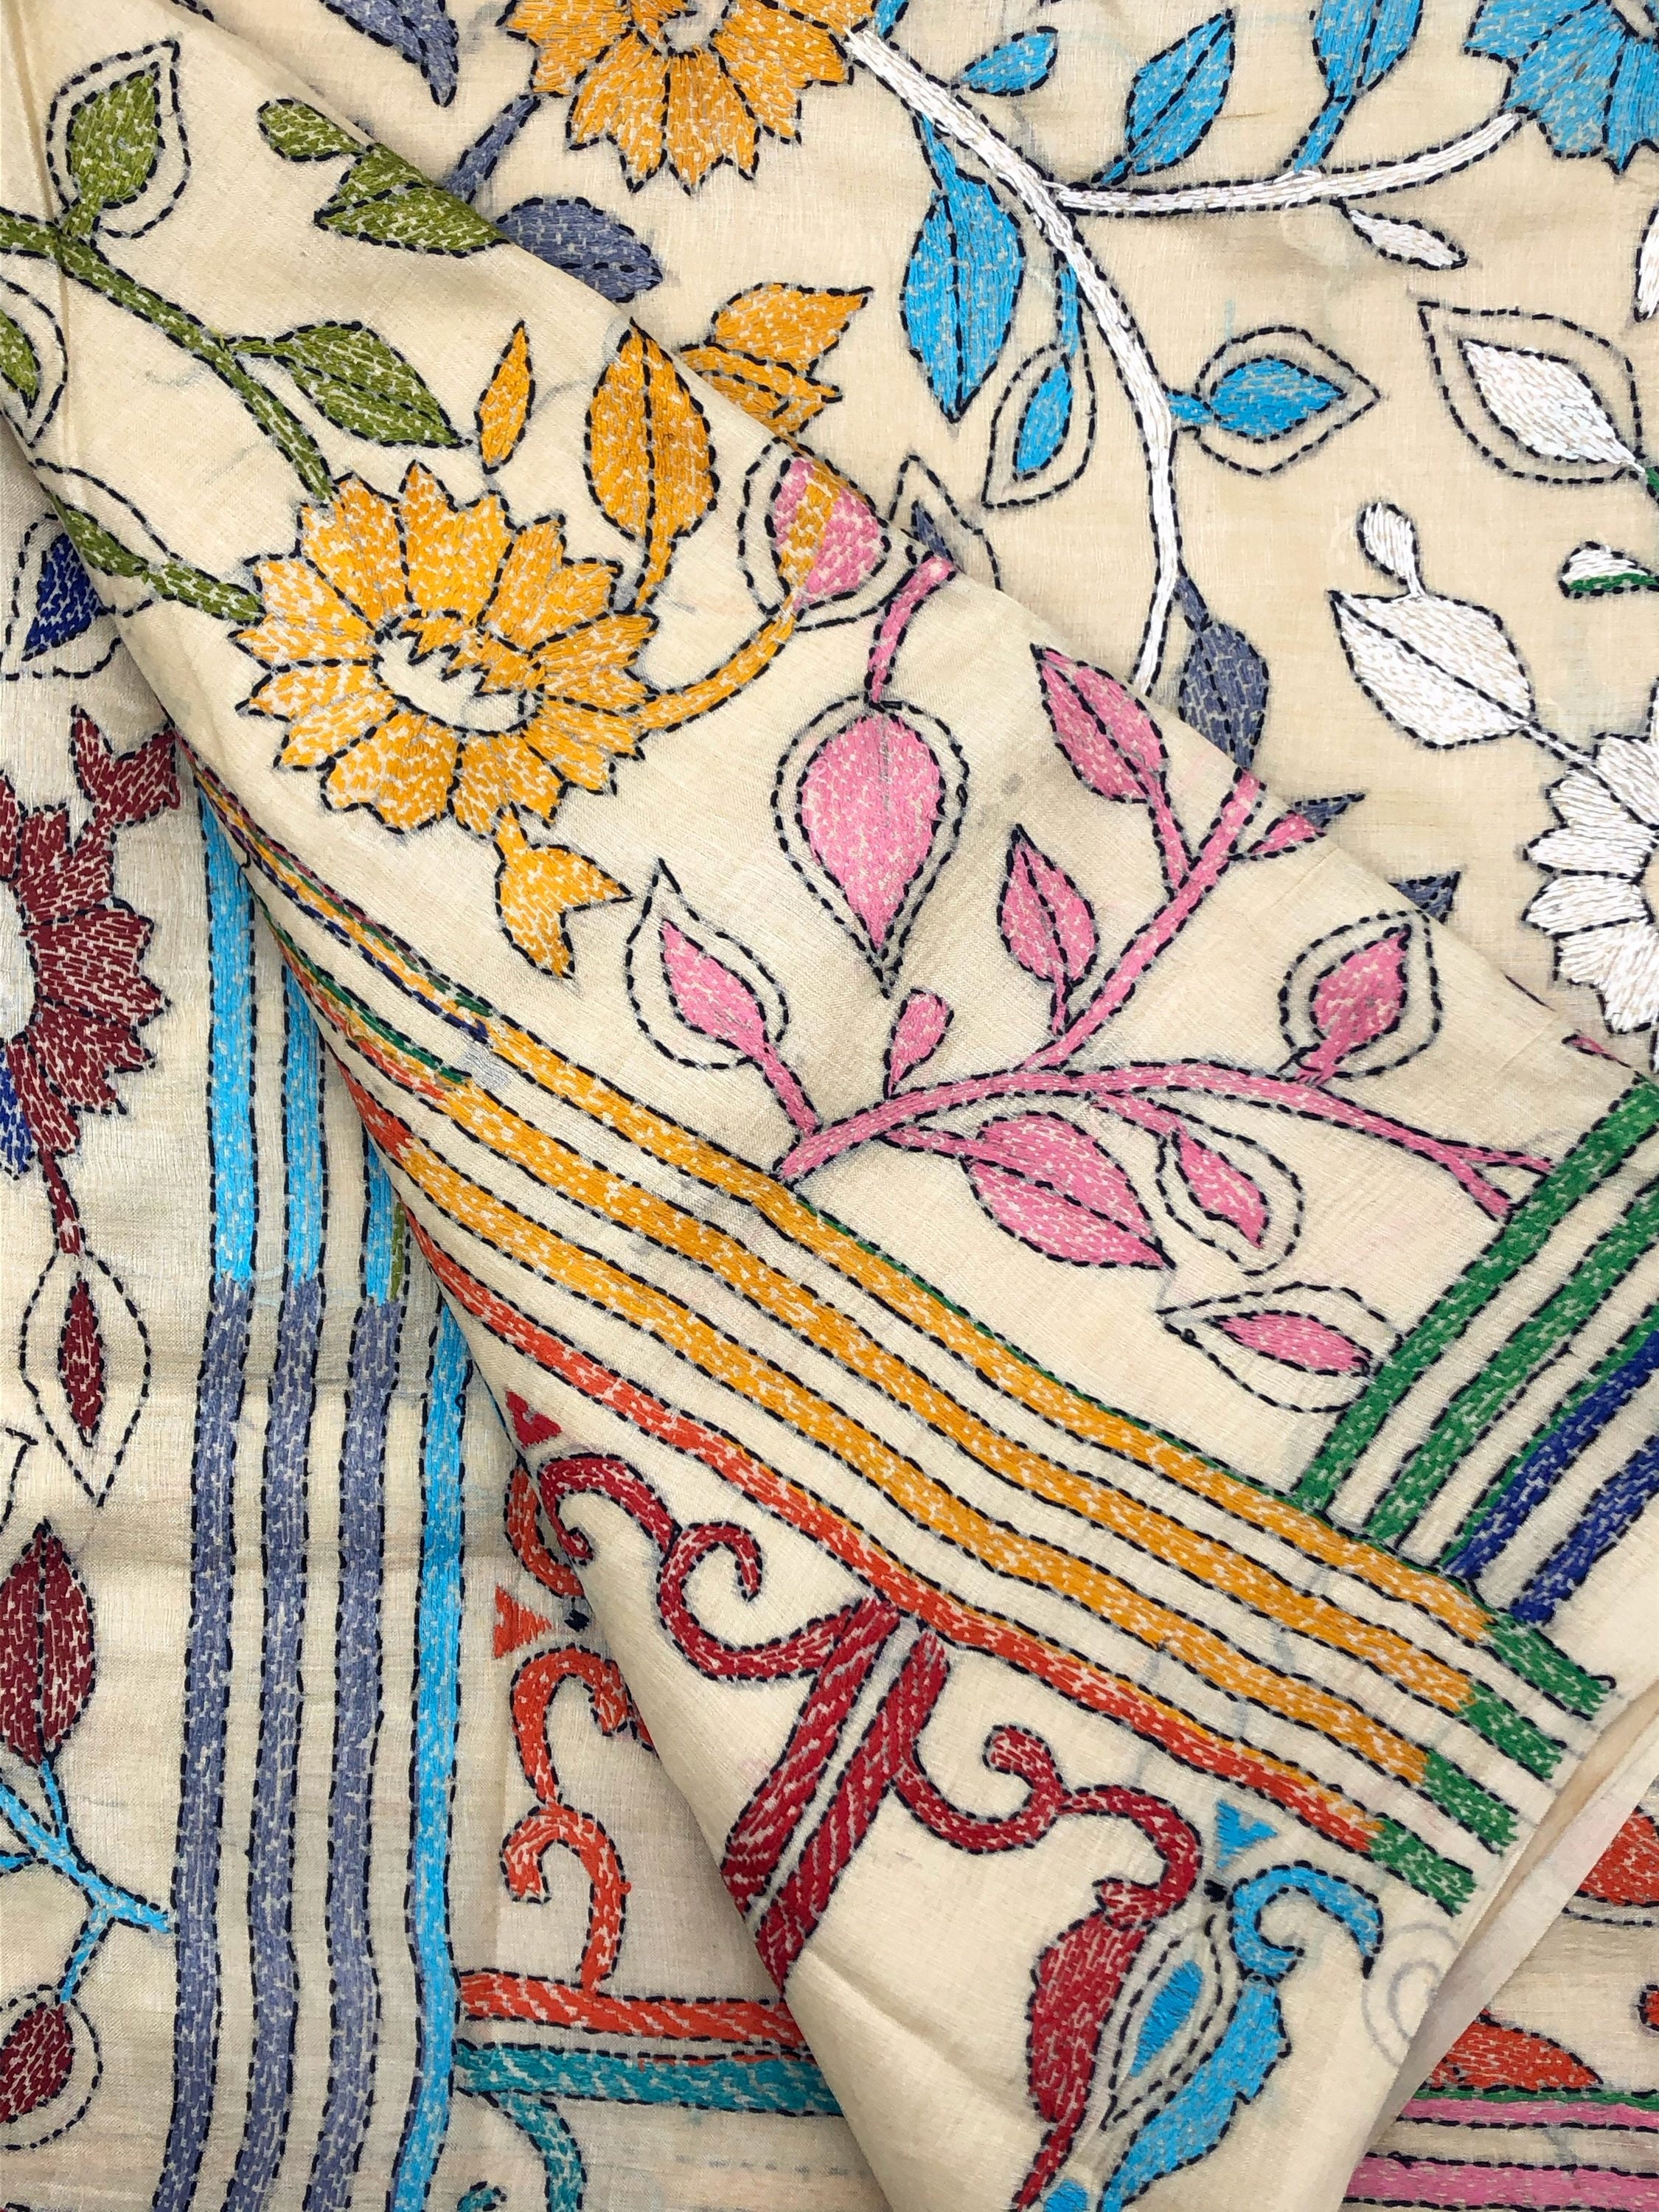 Colorful Flowers and Leaves Made with Kantha Stitches on White Tassar Silk